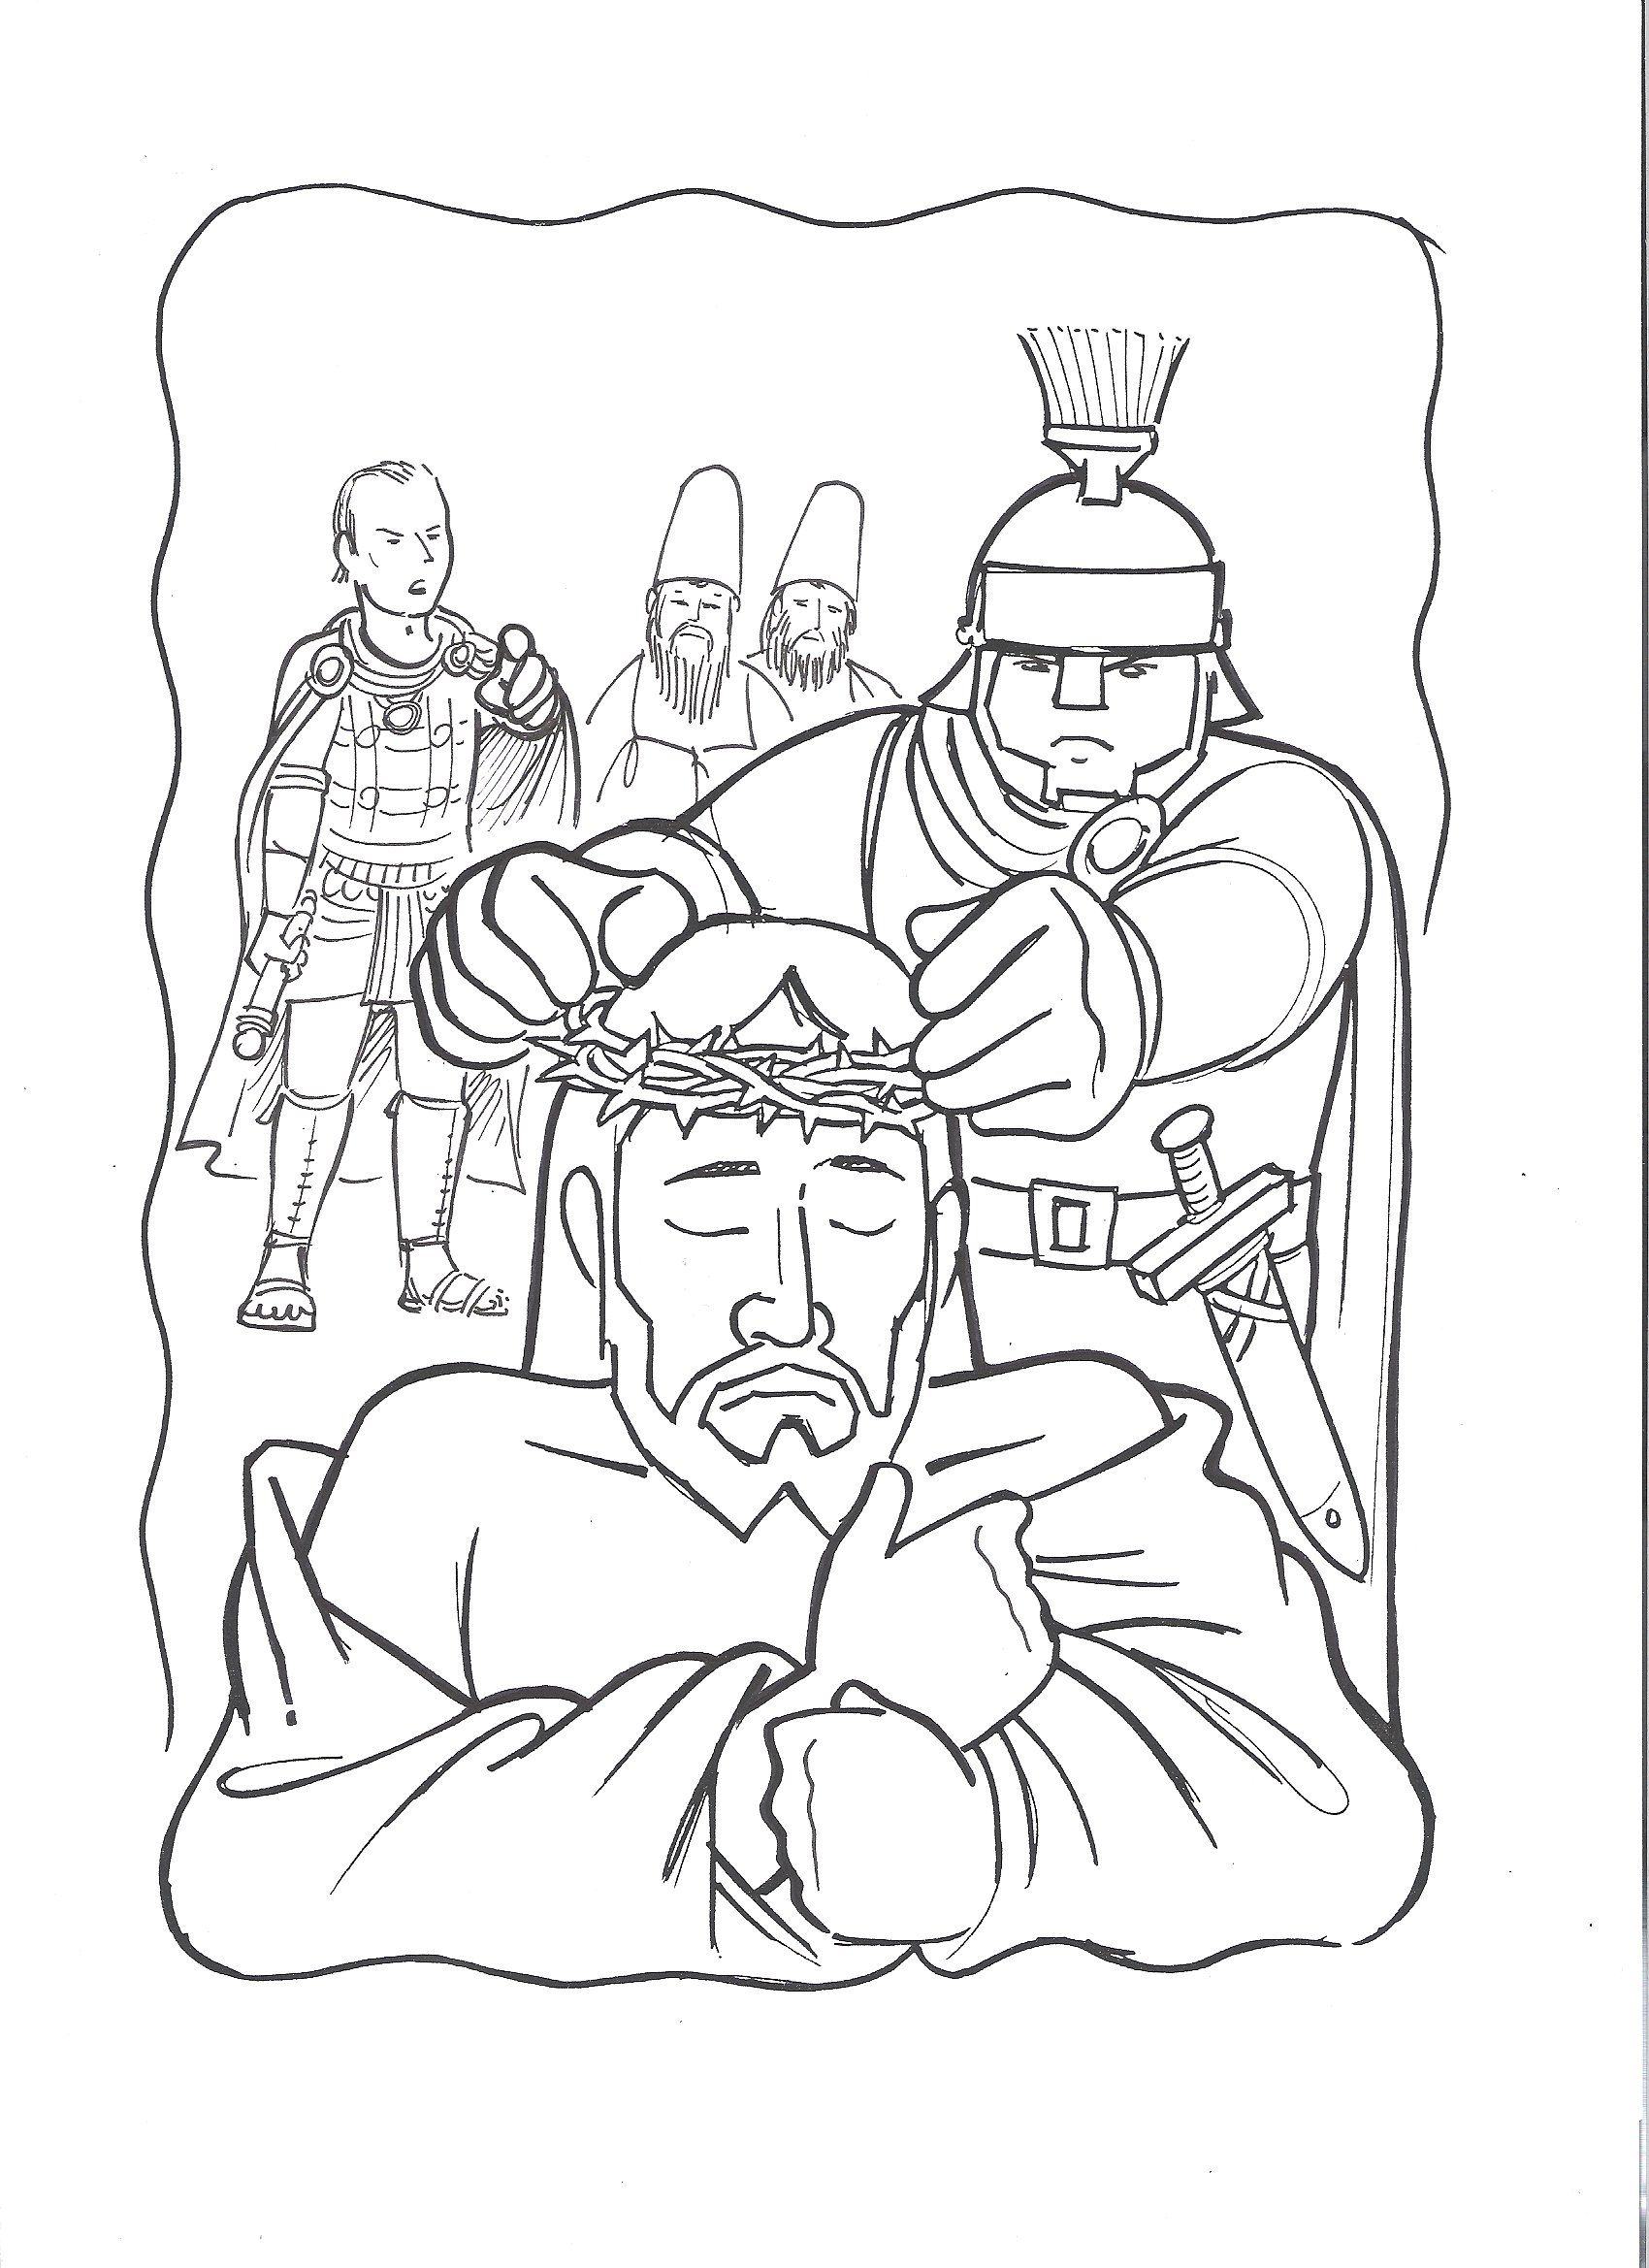 Jesus crowned with thorns coloring page jesus coloring pages bible coloring pages coloring pages